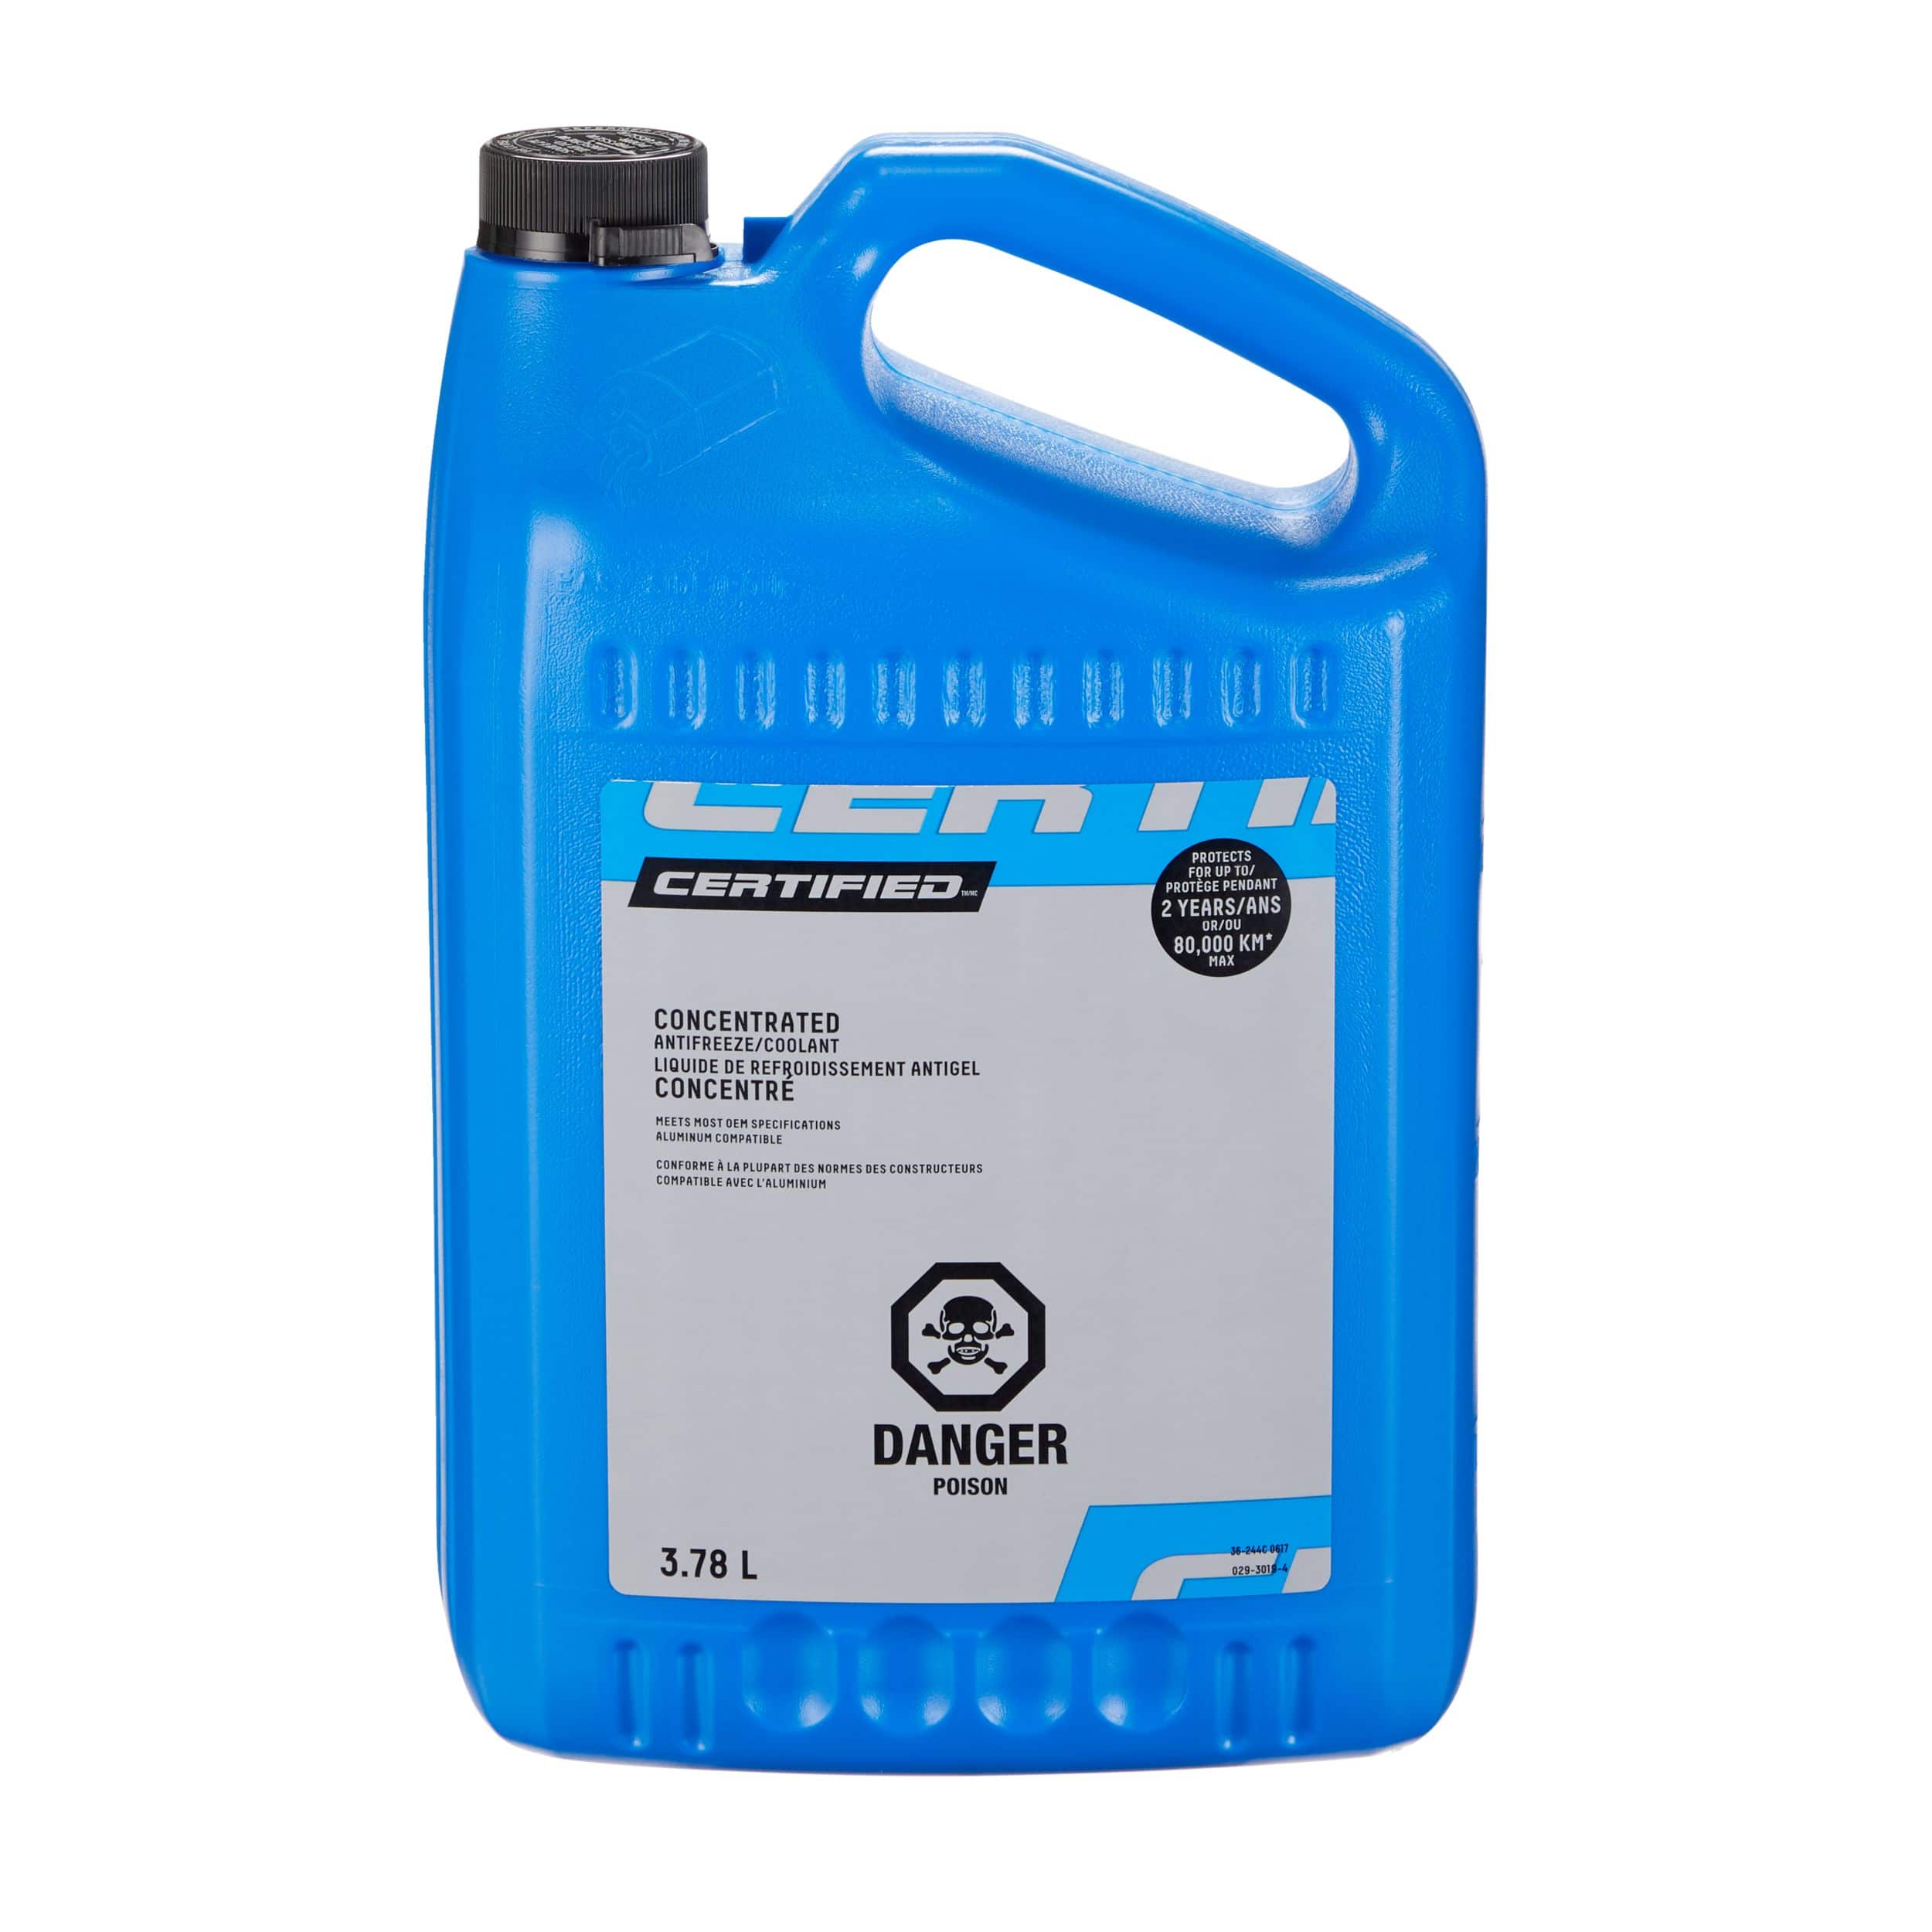 Certified Concentrated Anti-Freeze/Coolant, 3.78-L